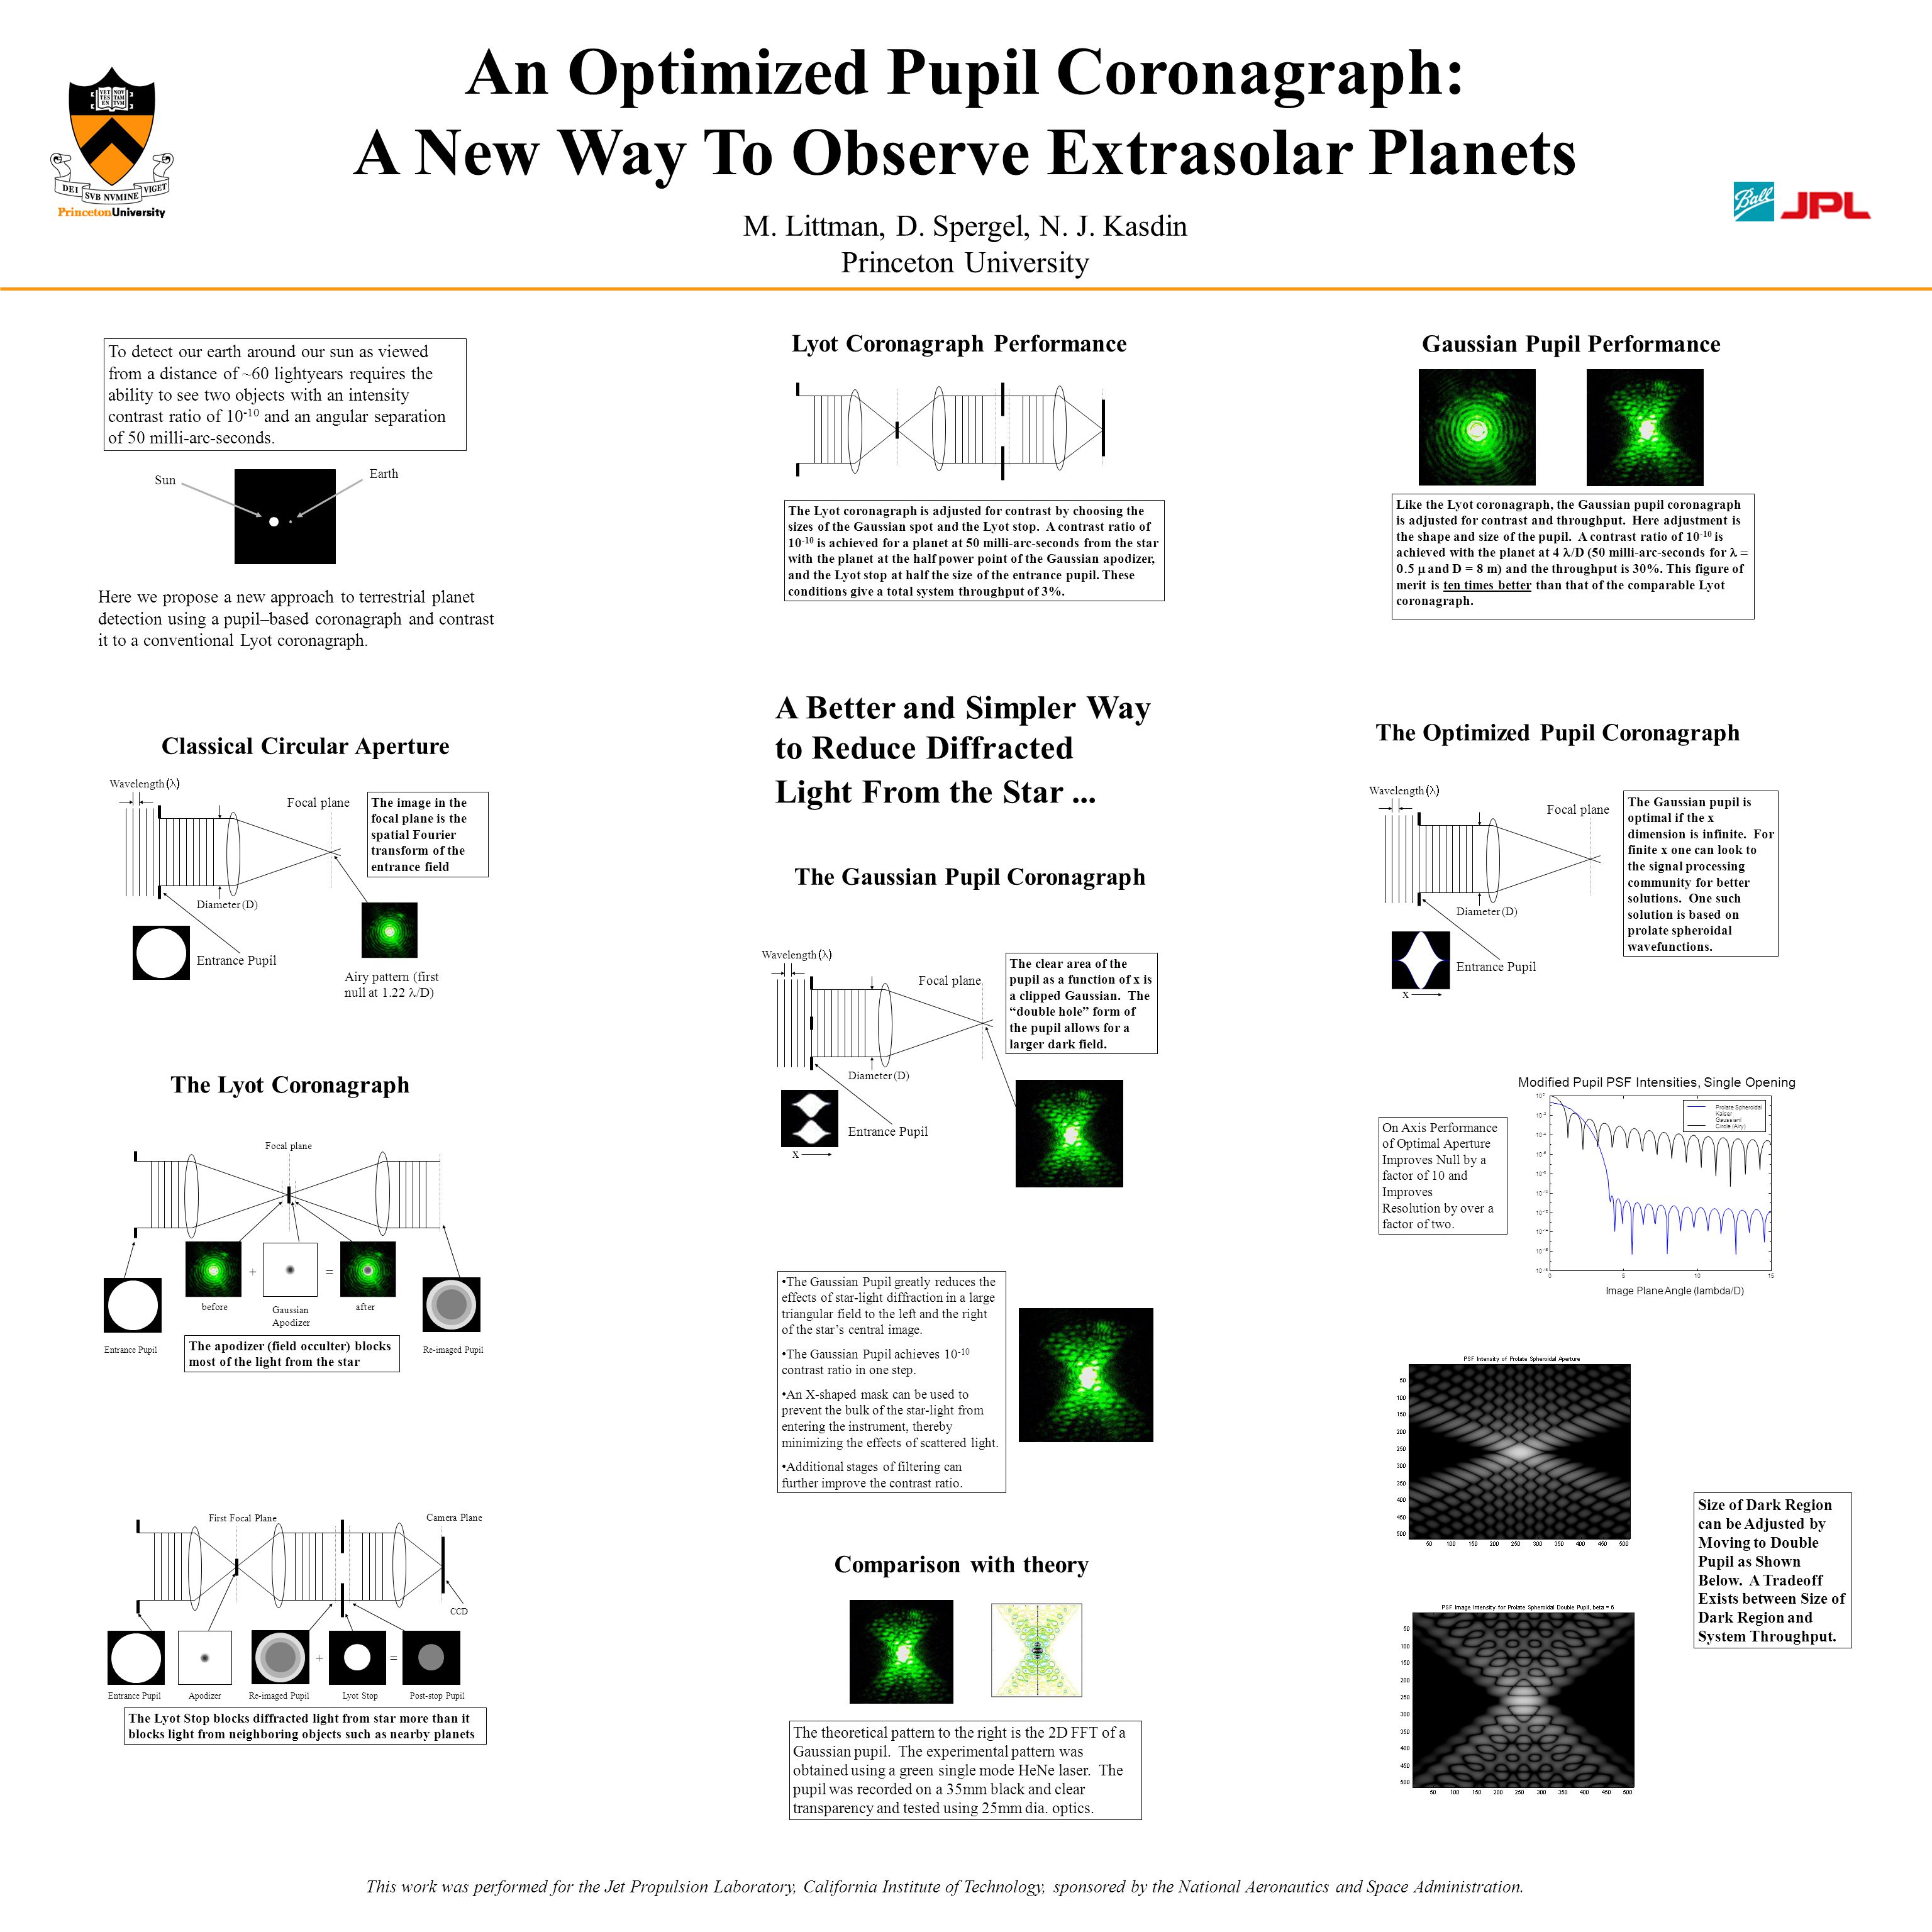 An Optimized Pupil Coronagraph: A New Way To Observe Extrasolar Planets This work was performed for the Jet Propulsion Laboratory, California Institute of Technology, sponsored by the National Aeronautics and Space Administration.